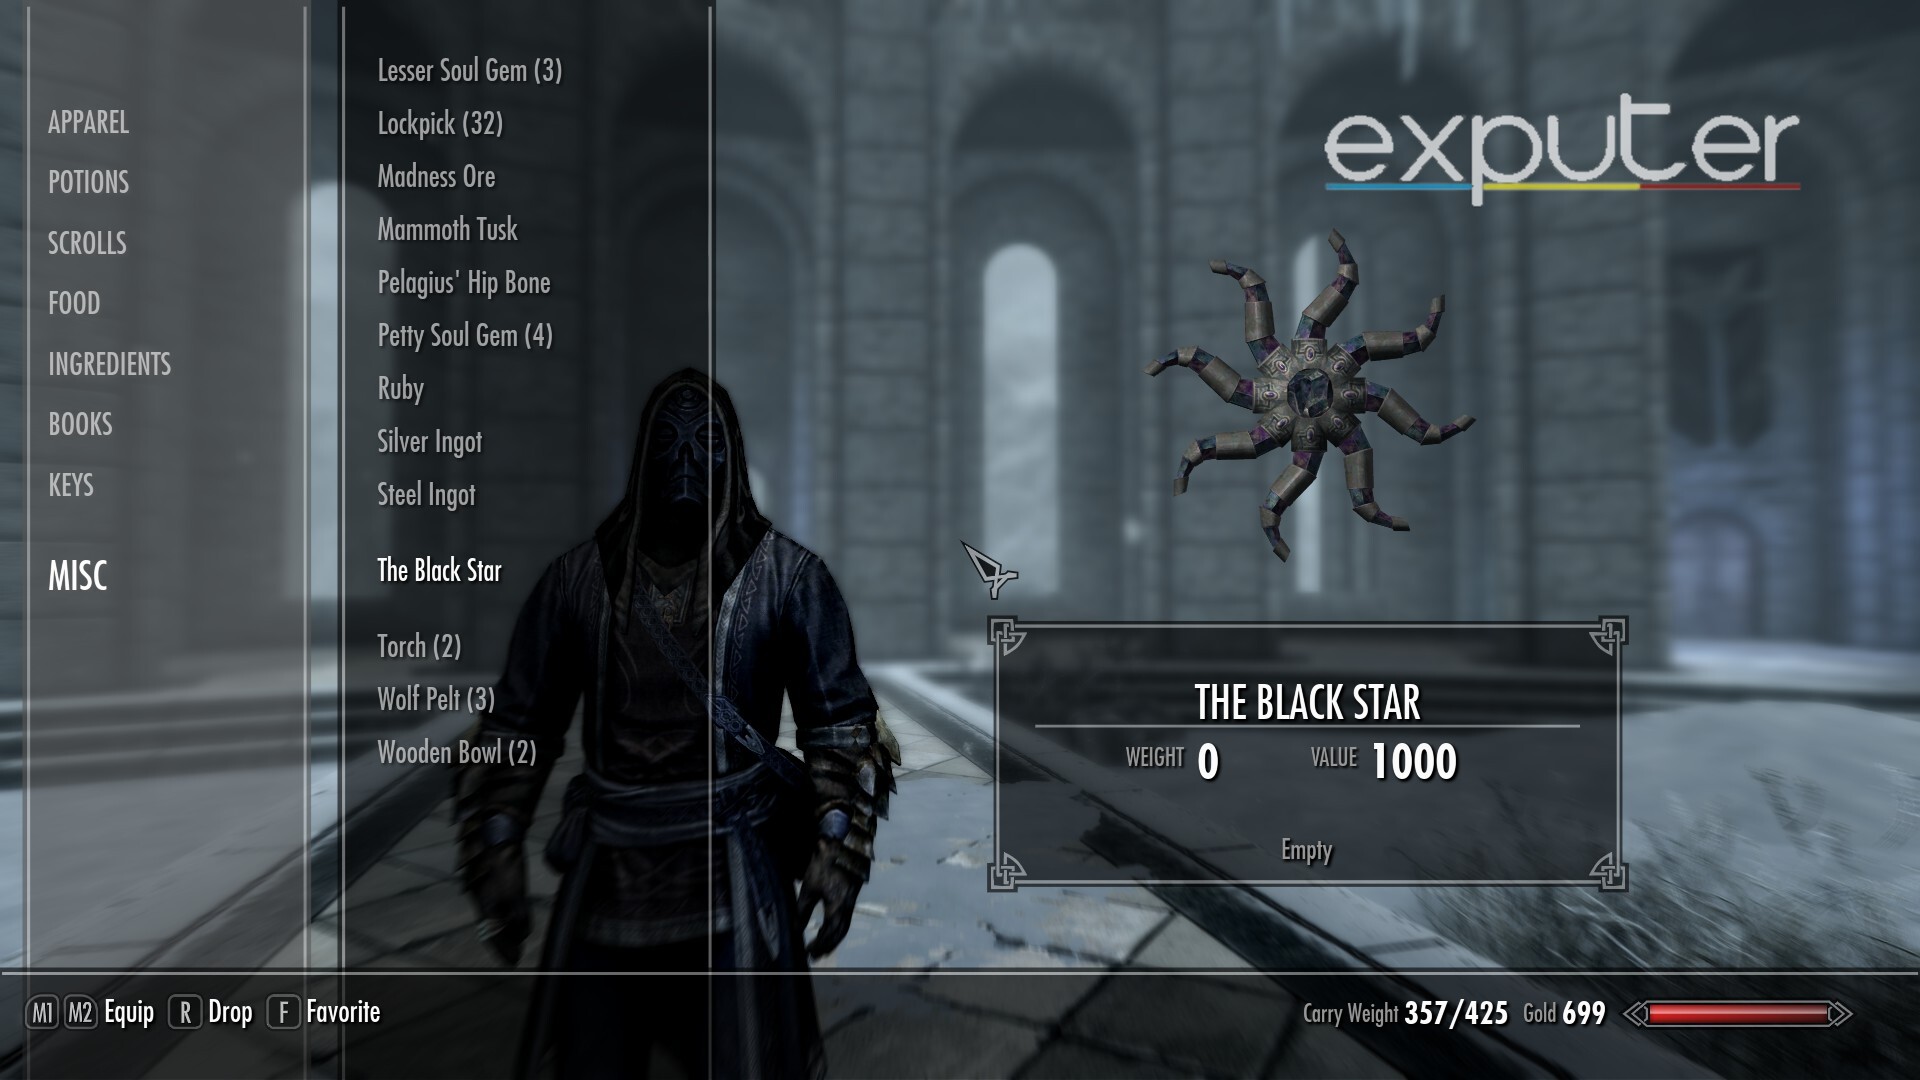 Use the black star in skyrim as mage.